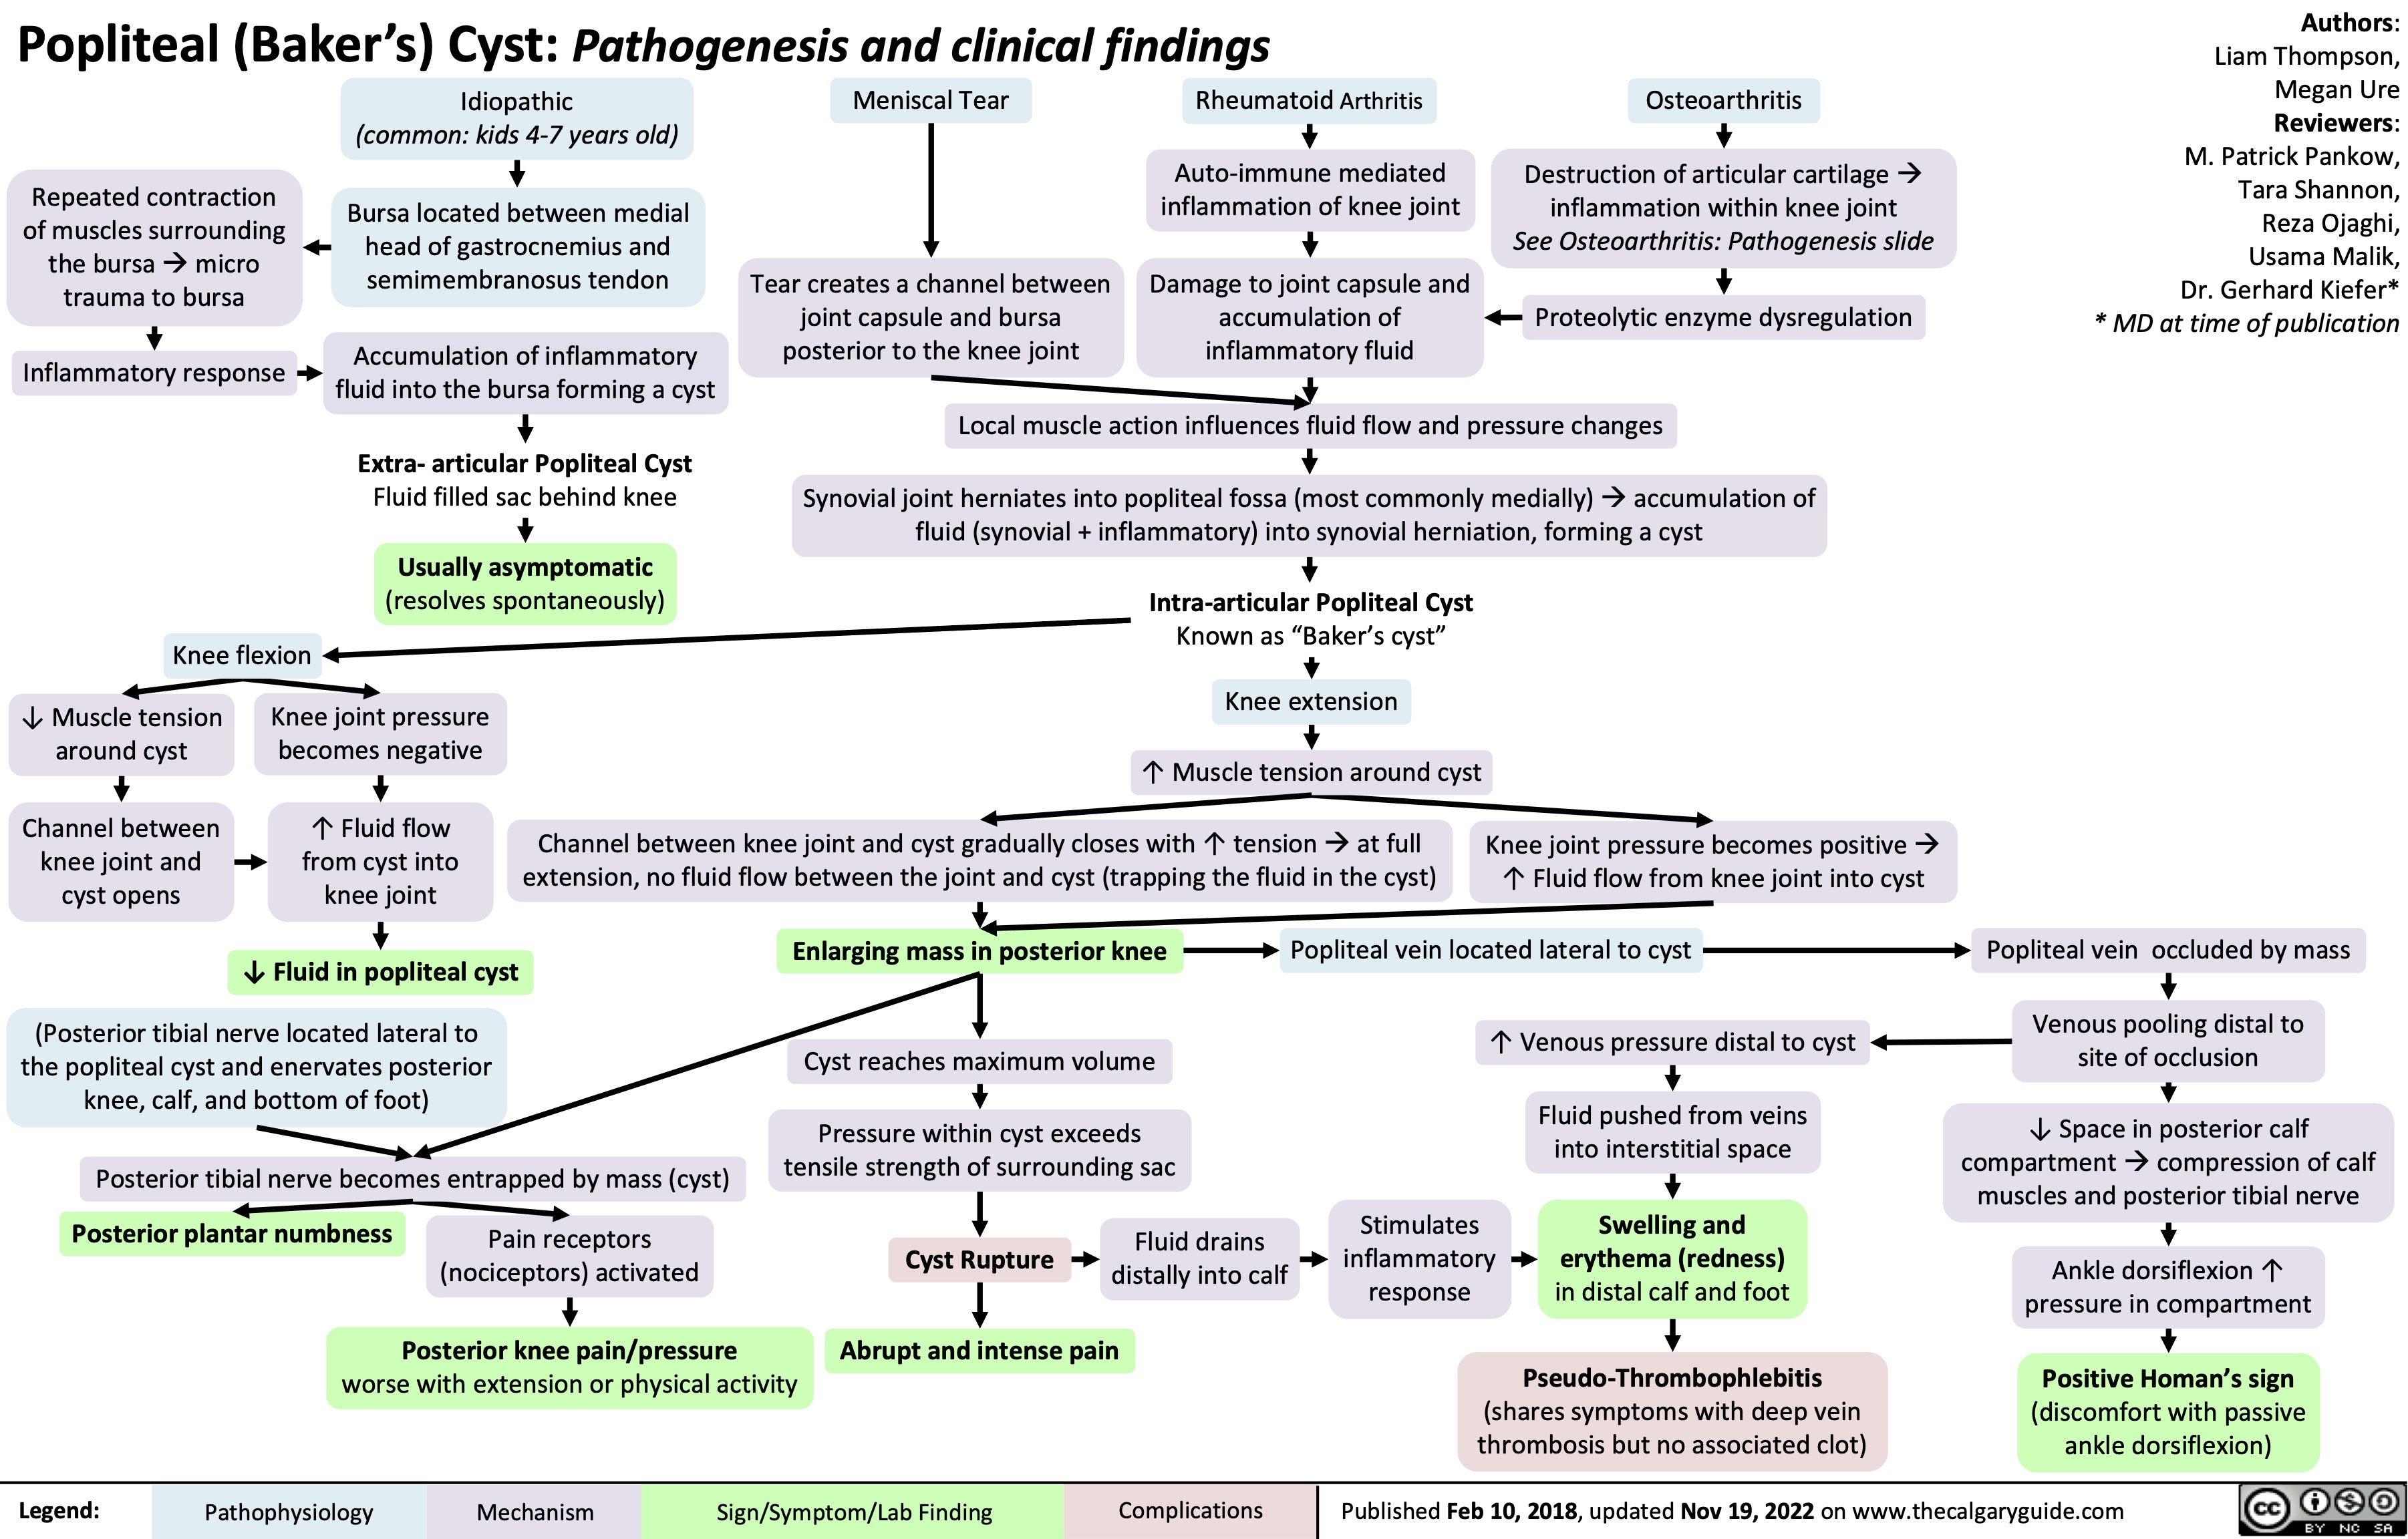 Popliteal (Baker’s) Cyst: Pathogenesis and clinical findings
Authors: Liam Thompson, Megan Ure Reviewers: M. Patrick Pankow, Tara Shannon, Reza Ojaghi, Usama Malik, Dr. Gerhard Kiefer* * MD at time of publication
        Repeated contraction of muscles surrounding the bursaàmicro trauma to bursa
Inflammatory response
Idiopathic
(common: kids 4-7 years old)
Bursa located between medial head of gastrocnemius and semimembranosus tendon
Accumulation of inflammatory fluid into the bursa forming a cyst
Meniscal Tear
Tear creates a channel between joint capsule and bursa posterior to the knee joint
Rheumatoid Arthritis
Auto-immune mediated inflammation of knee joint
Osteoarthritis
Destruction of articular cartilageà inflammation within knee joint See Osteoarthritis: Pathogenesis slide
   Damage to joint capsule and accumulation of inflammatory fluid
 Proteolytic enzyme dysregulation Local muscle action influences fluid flow and pressure changes
    Extra- articular Popliteal Cyst
Fluid filled sac behind knee
Usually asymptomatic
(resolves spontaneously)
Synovial joint herniates into popliteal fossa (most commonly medially)àaccumulation of fluid (synovial + inflammatory) into synovial herniation, forming a cyst
    Knee flexion
Intra-articular Popliteal Cyst
Known as “Baker’s cyst”
Knee extension
↑ Muscle tension around cyst
Channel between knee joint and cyst gradually closes with ↑ tensionàat full extension, no fluid flow between the joint and cyst (trapping the fluid in the cyst)
     ↓ Muscle tension around cyst
Channel between knee joint and cyst opens
Knee joint pressure becomes negative
↑ Fluid flow from cyst into knee joint
↓ Fluid in popliteal cyst
Knee joint pressure becomes positiveà ↑ Fluid flow from knee joint into cyst
                (Posterior tibial nerve located lateral to the popliteal cyst and enervates posterior knee, calf, and bottom of foot)
Posterior tibial nerve becomes entrapped by mass (cyst)
Enlarging mass in posterior knee
Cyst reaches maximum volume
Pressure within cyst exceeds tensile strength of surrounding sac
Fluid drains distally into calf
Popliteal vein located lateral to cyst
↑ Venous pressure distal to cyst
Popliteal vein occluded by mass
Venous pooling distal to site of occlusion
↓ Space in posterior calf compartmentàcompression of calf muscles and posterior tibial nerve
Ankle dorsiflexion ↑ pressure in compartment
Positive Homan’s sign
(discomfort with passive ankle dorsiflexion)
              Posterior plantar numbness
Pain receptors (nociceptors) activated
Posterior knee pain/pressure
Cyst Rupture Abrupt and intense pain
Stimulates inflammatory response
Fluid pushed from veins into interstitial space
Swelling and erythema (redness) in distal calf and foot
Pseudo-Thrombophlebitis
       worse with extension or physical activity
(shares symptoms with deep vein thrombosis but no associated clot)
 Legend:
 Pathophysiology
Mechanism
 Sign/Symptom/Lab Finding
 Complications
 Published Feb 10, 2018, updated Nov 19, 2022 on www.thecalgaryguide.com
  